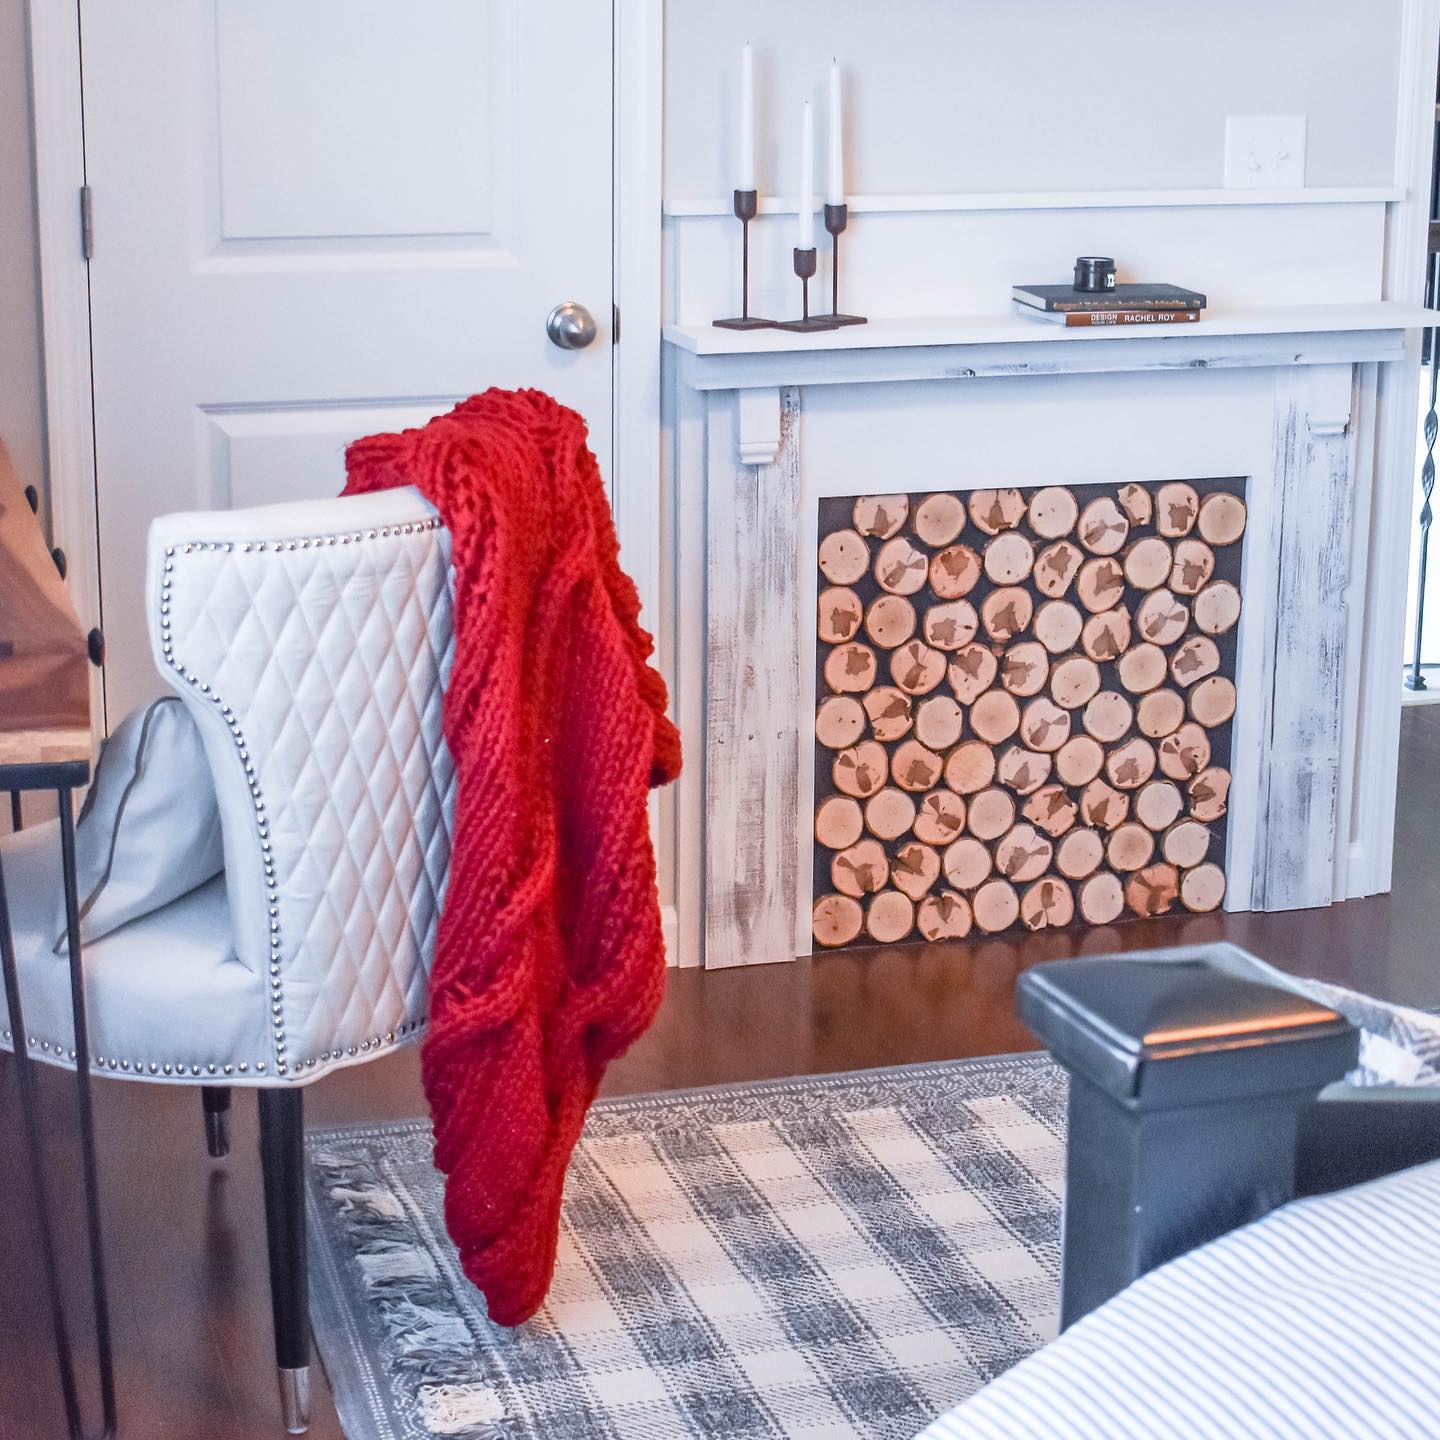 Even though this is just a easy #diy faux decorative #farmhousestyle fireplace, which is not functional I still love the sweet cozy charm it adds to this guest room. I have always said I would have a fireplace in every room of my home, I just love the warmth and coziness that they add especially in the winter months. You can see how we built this beauty with my link 👆🏻 in the bio and tune in next week to see a great new DIY as we add just a little more cozy into our home, but where? 
.
.
.
#jenrondesigns 
#fireplace 
#farmhousedecor 
#farmhouse 
#diyprojects 
#modernfarmhouse 
#winterdecor 
#rusticdecor 
#shiplapfireplace 
#shiplap 
#first1friday 
#countryliving 
#countrylivingmag 
#countrylivingmagazine 
#betterhomesandgardens 
#bhgstylemaker 
#bhghome 
#bedroomdecor 
#cozyhome 
#cozylivingroom 
#vintagestyle 
#blameitonmyvintageheart 
#howwefarmhouse 
#homedecor 
#dailydecordose 
#homestyle 
#styleithappy 
#stylingfortheseasons